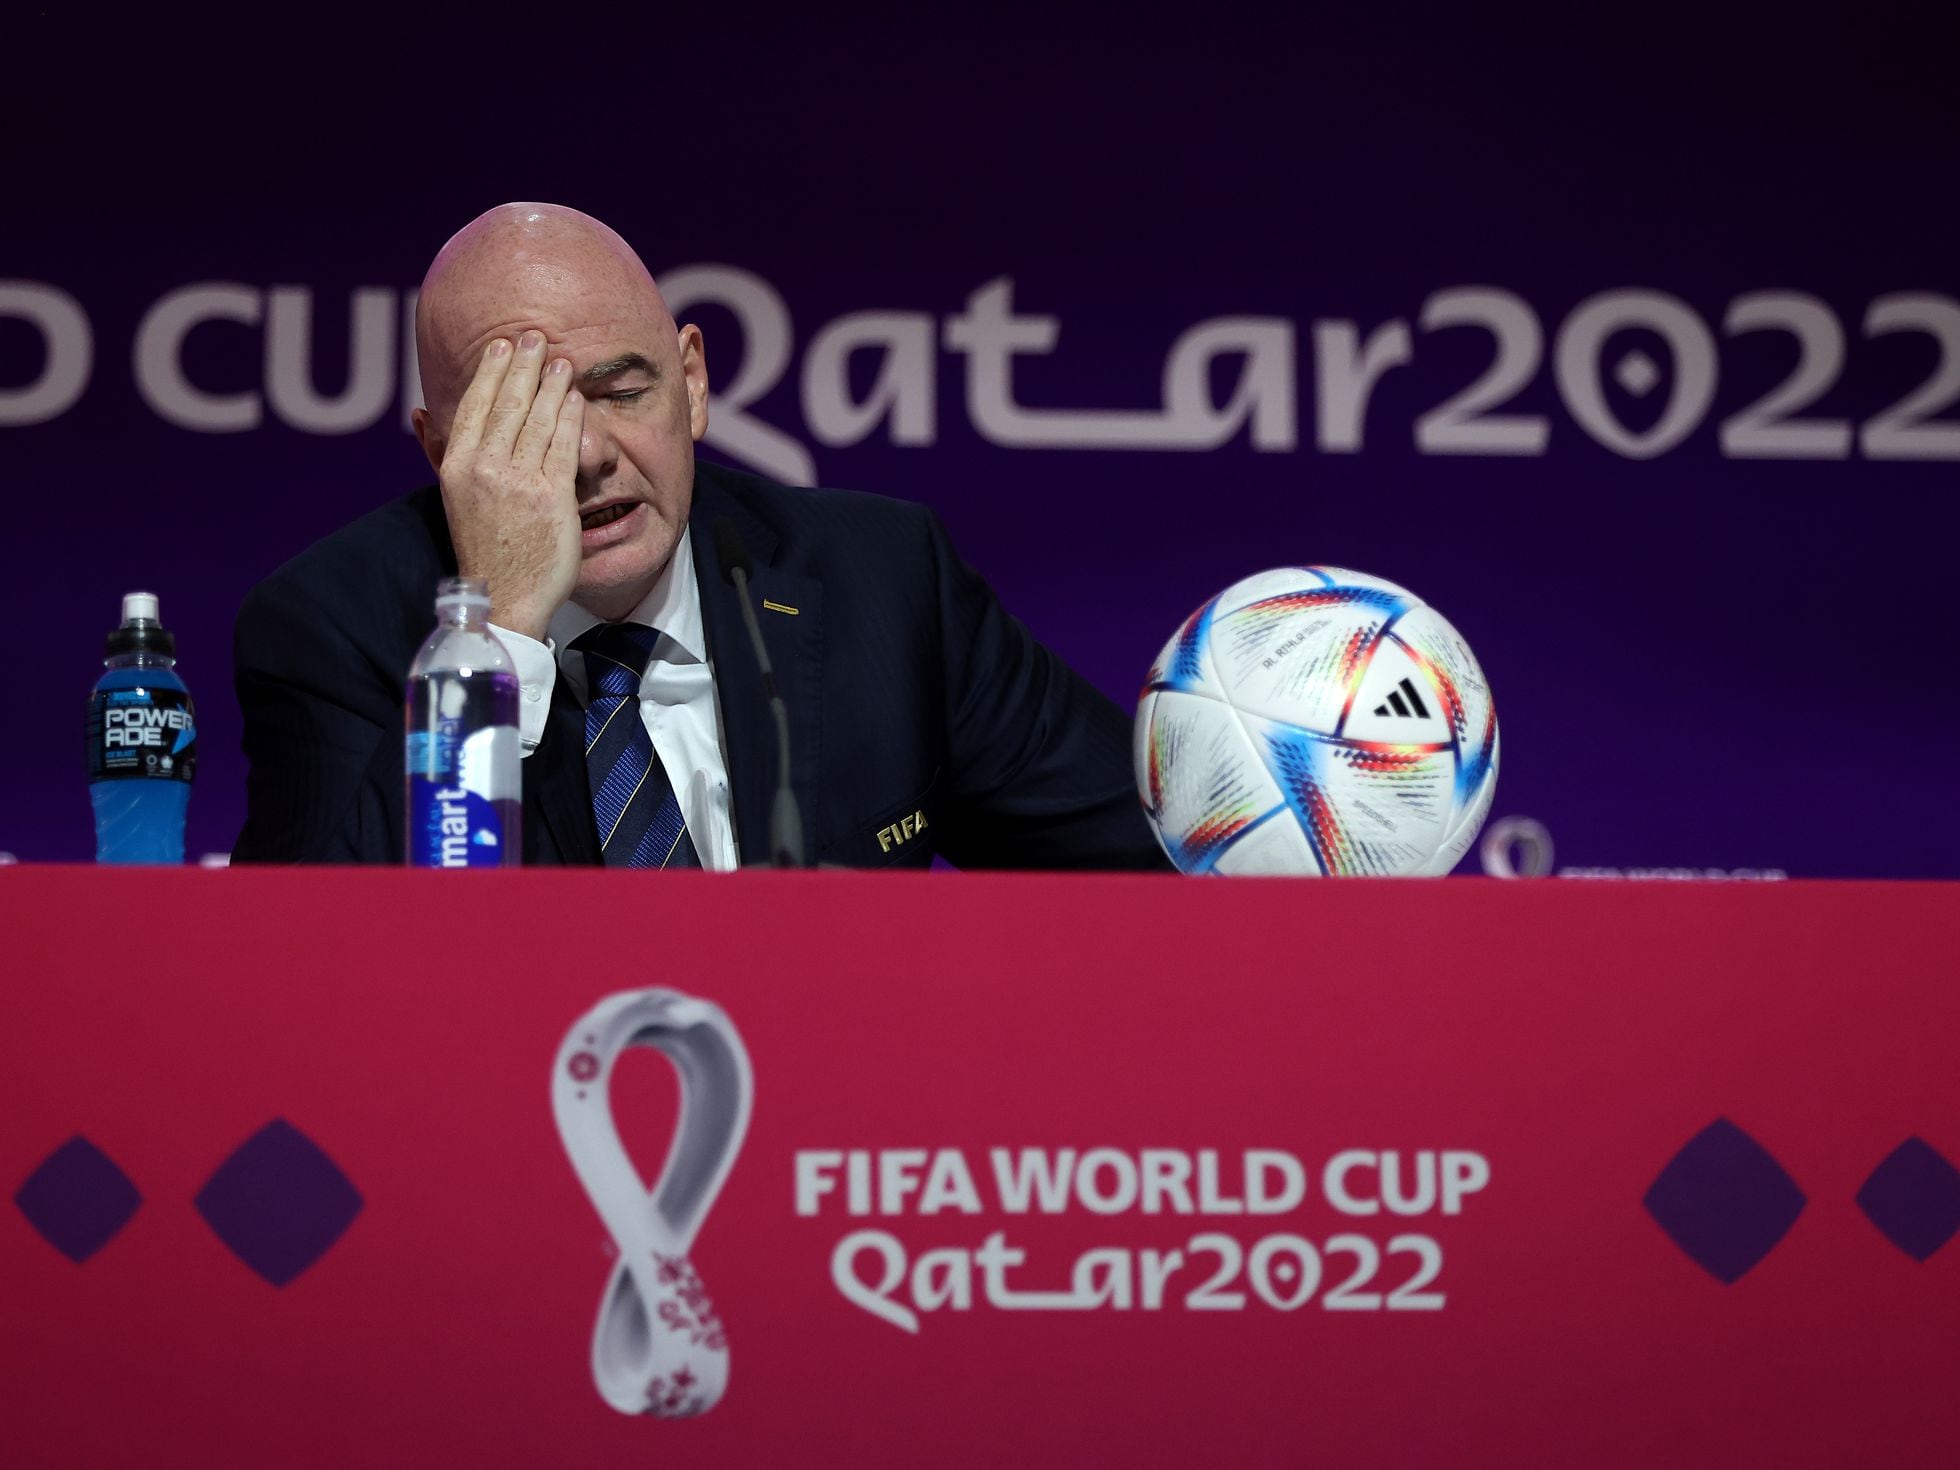 Qatar FIFA World Cup controversial but advertisers not steering clear